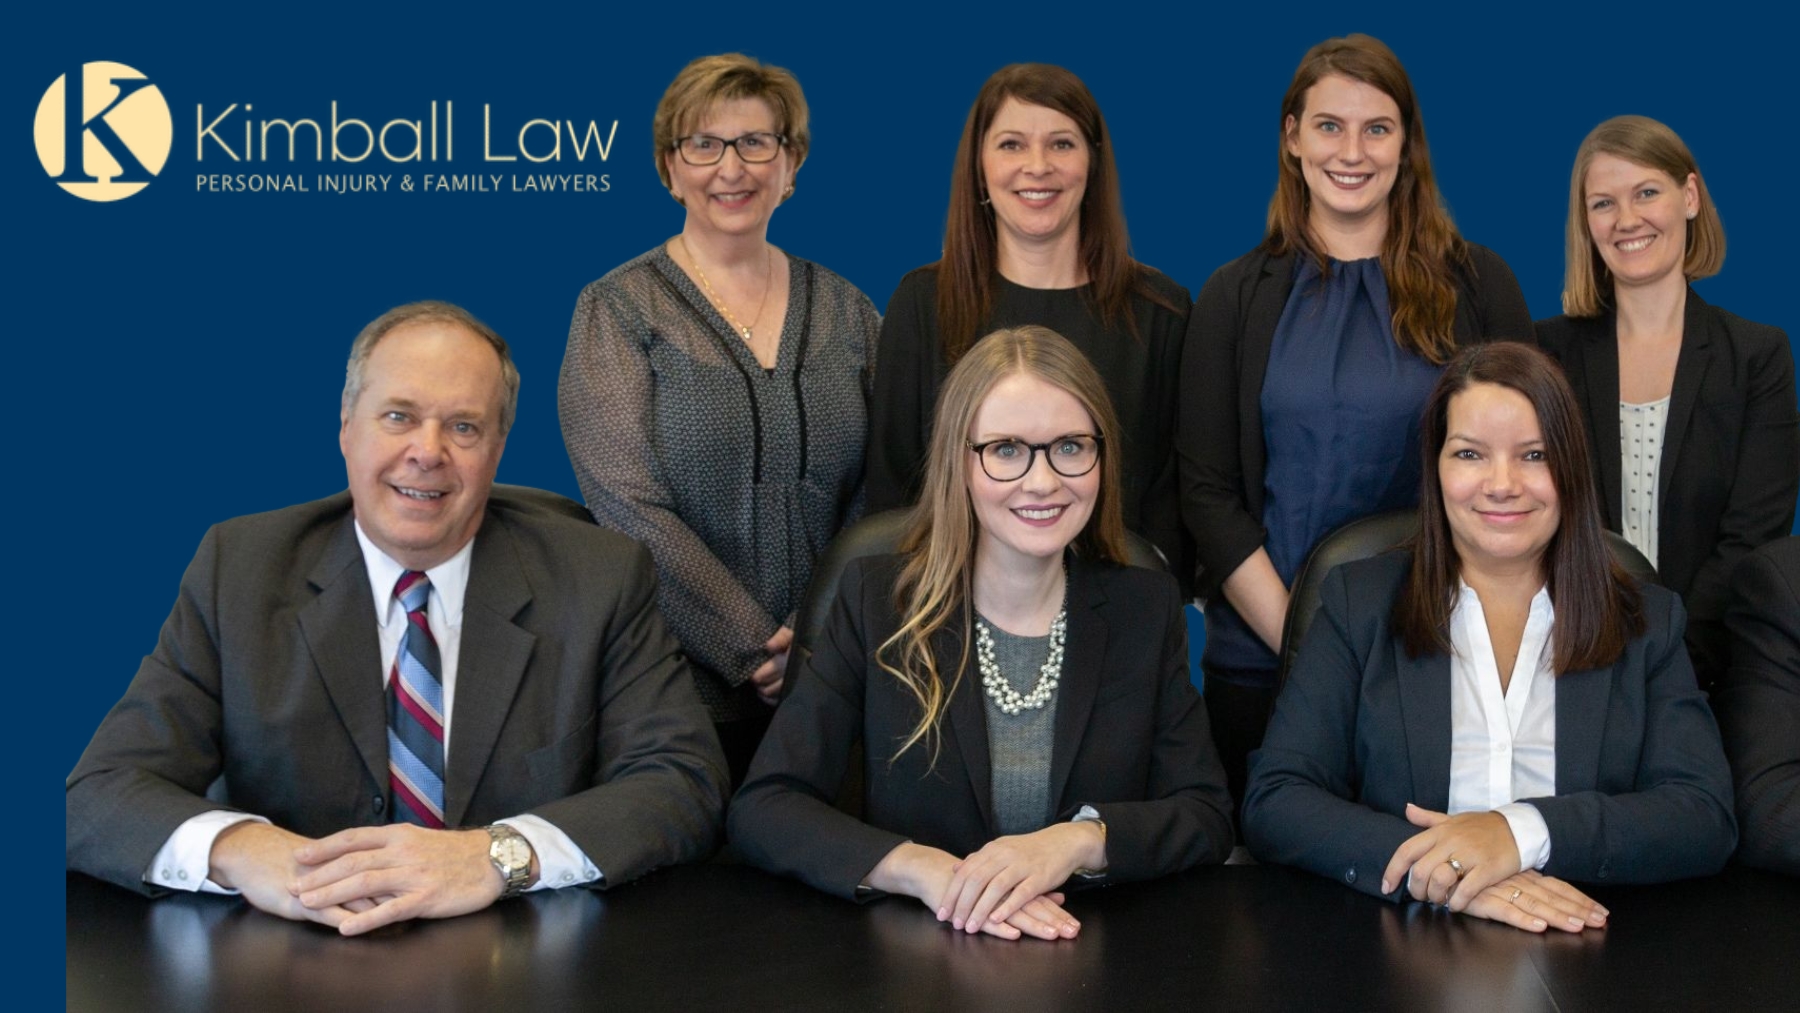 Kimball Law personal injury legal team